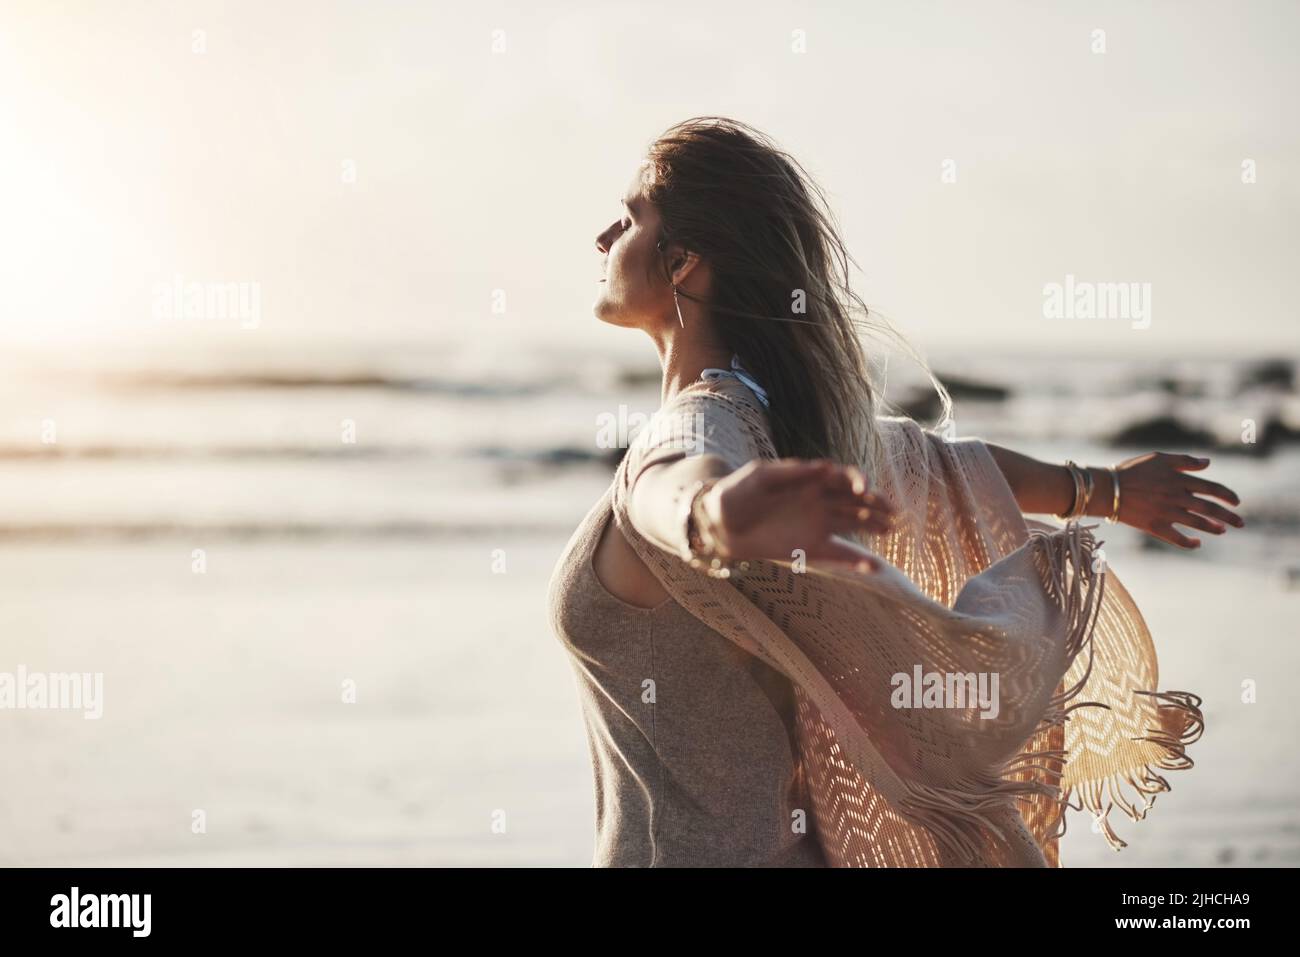 Live life on the sunny side. an attractive young woman standing with her arms outstretched at the beach. Stock Photo